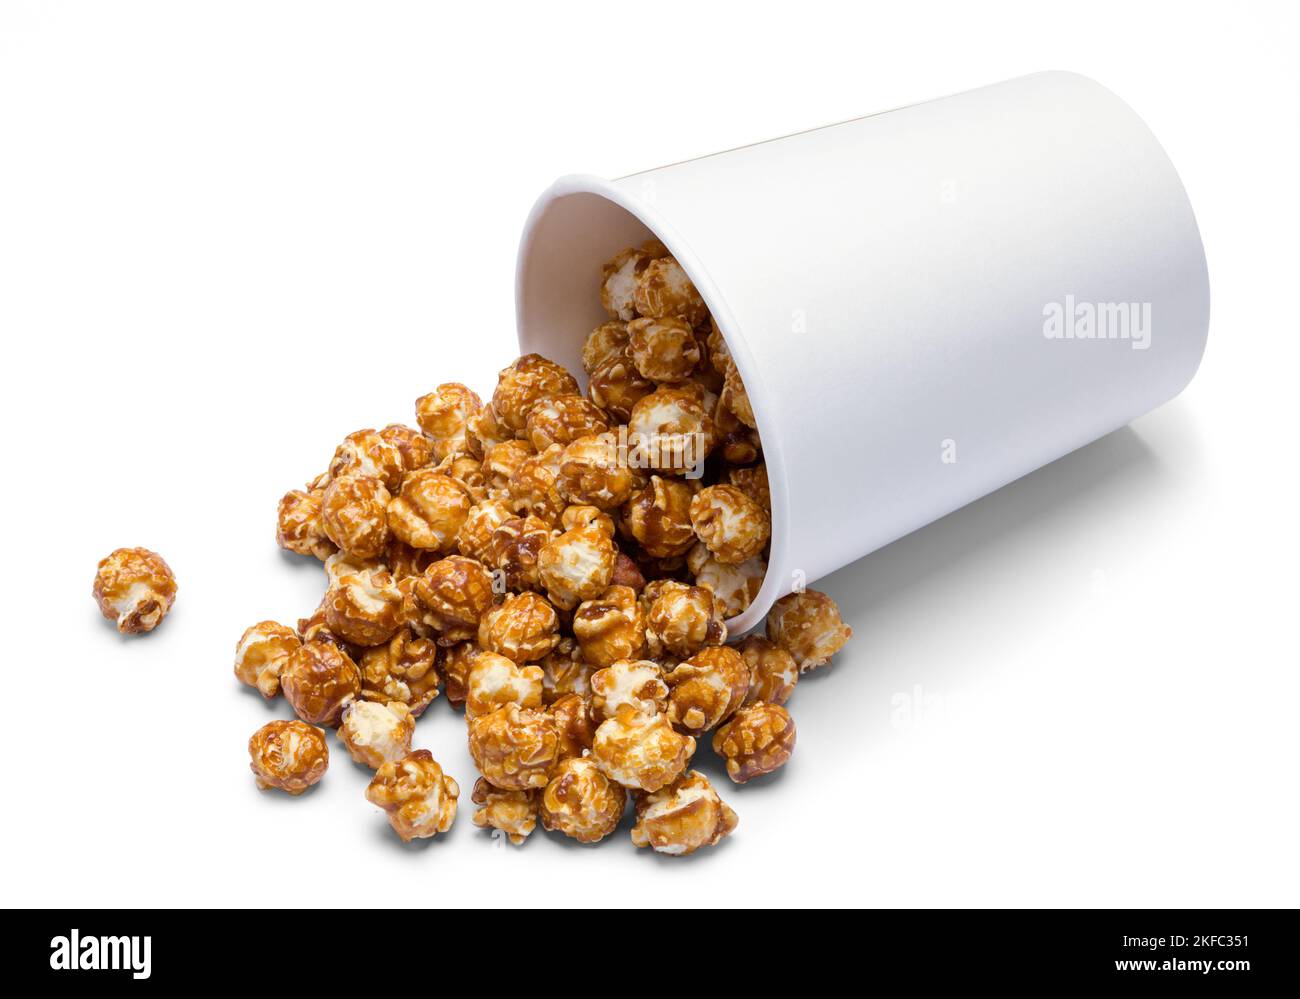 Spilled Tub of Caramel Corn Cut Out. Stock Photo